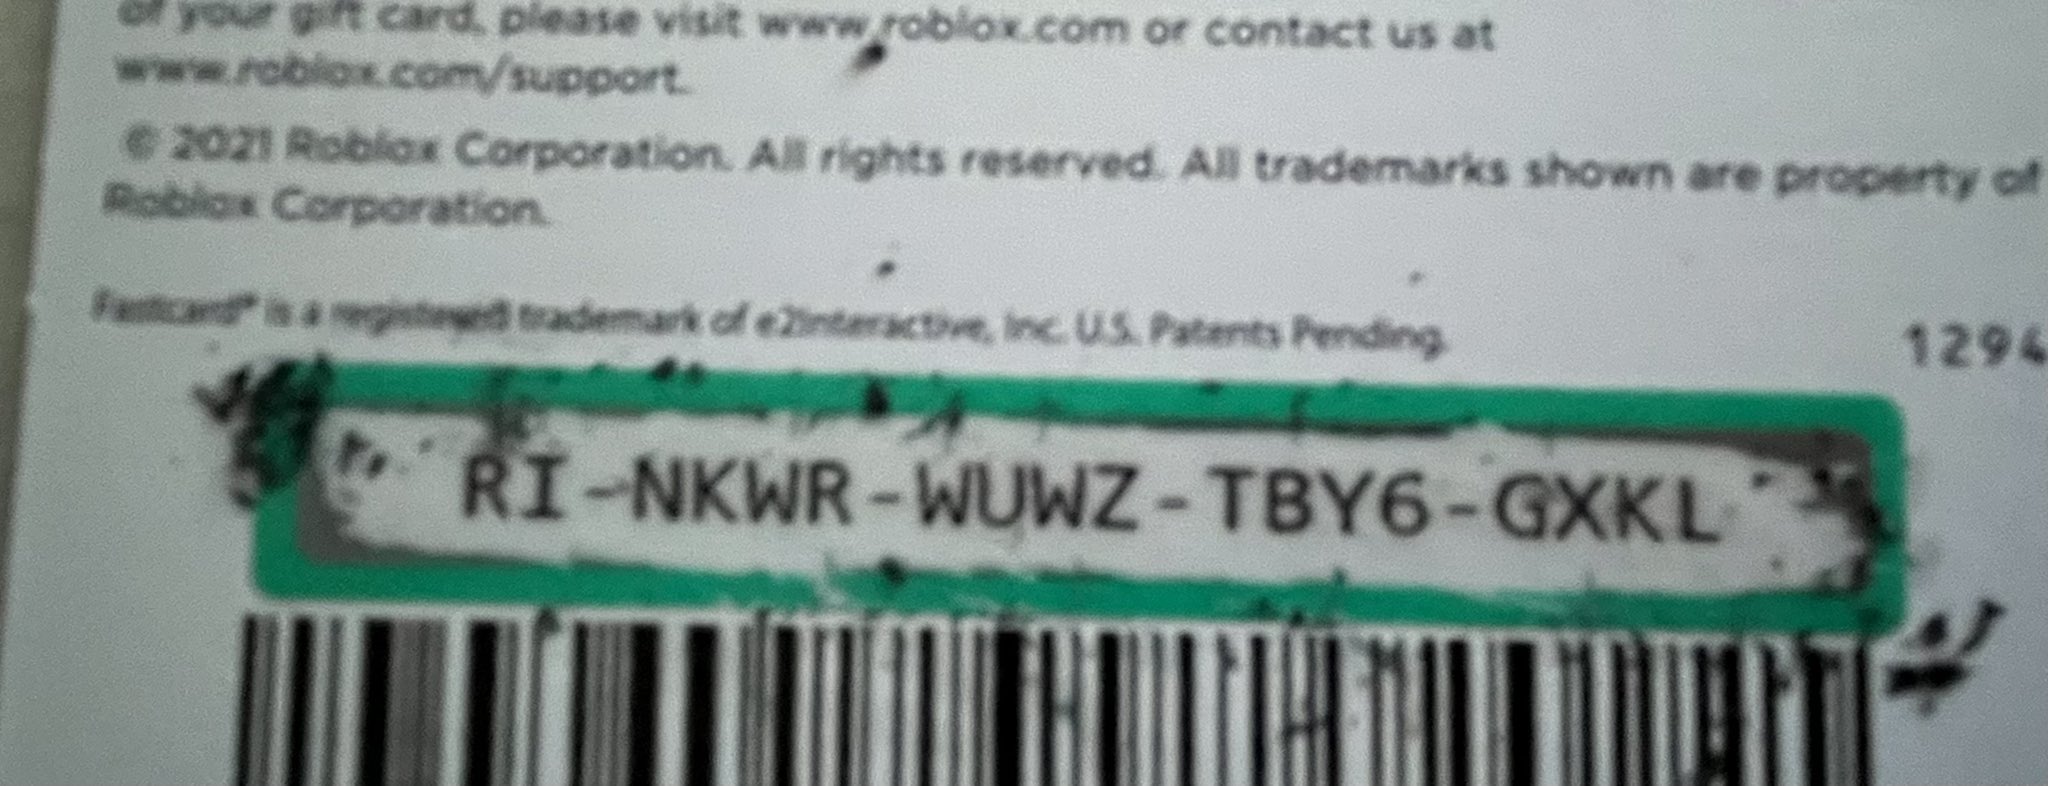 Robux gift card codes